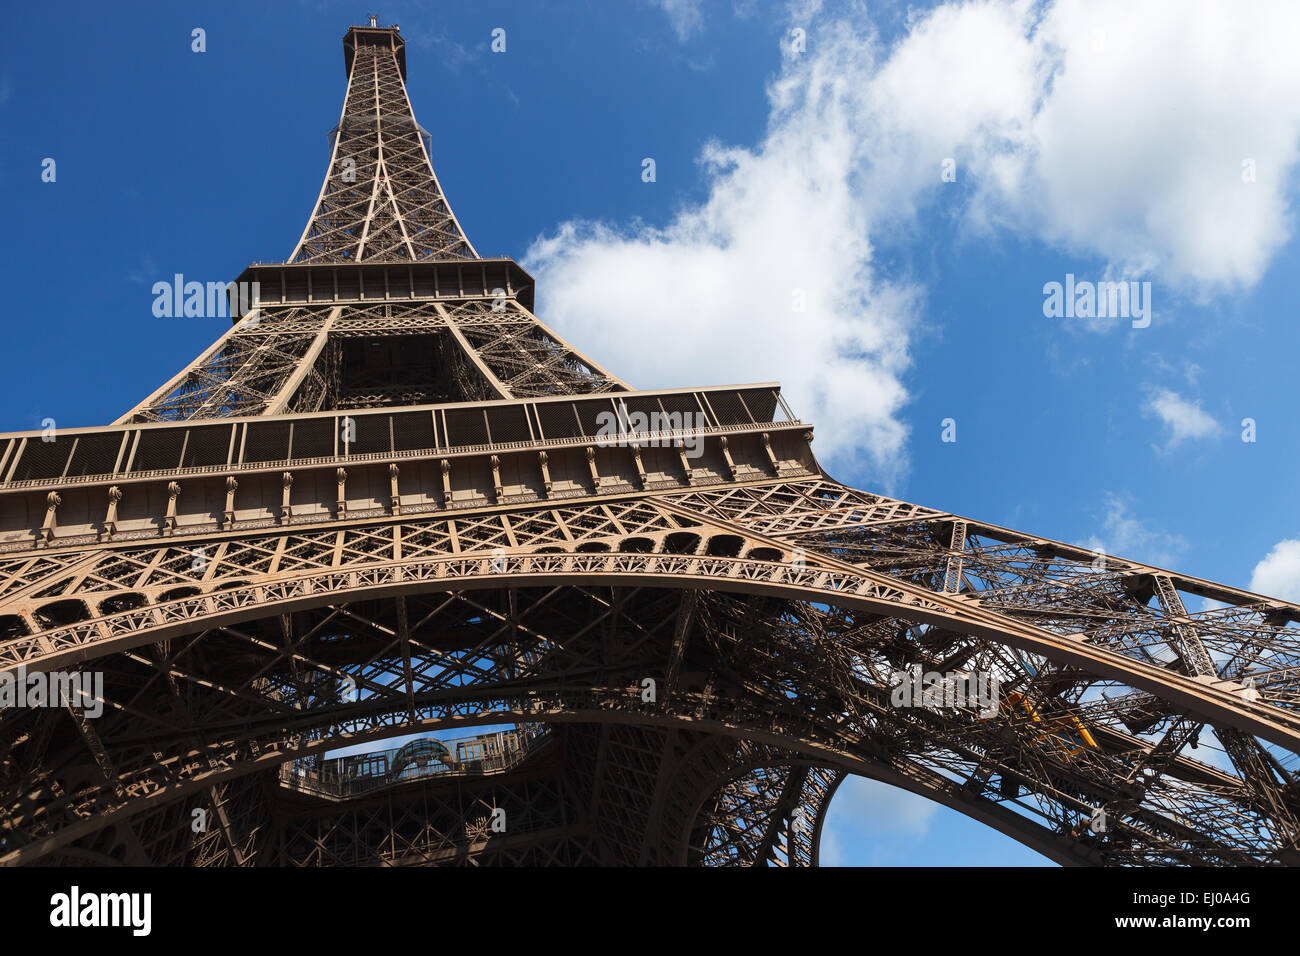 The Eiffel Tower as seen from below, Paris, France. Stock Photo